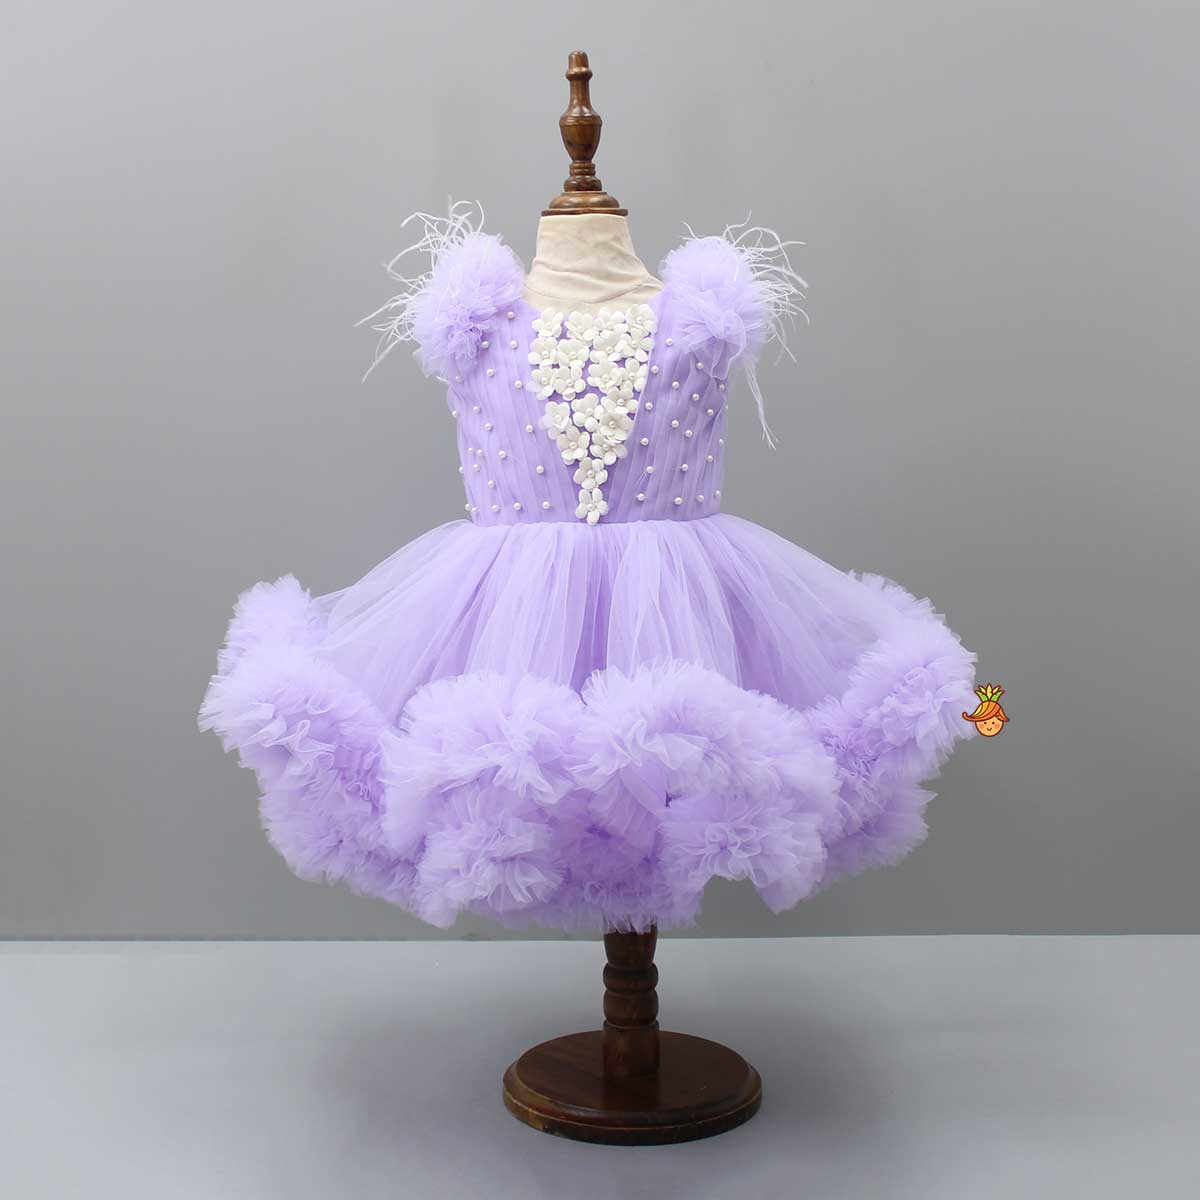 Pre Order: Ruffled Dress With Matching Bow And Swirled Bowie Headband